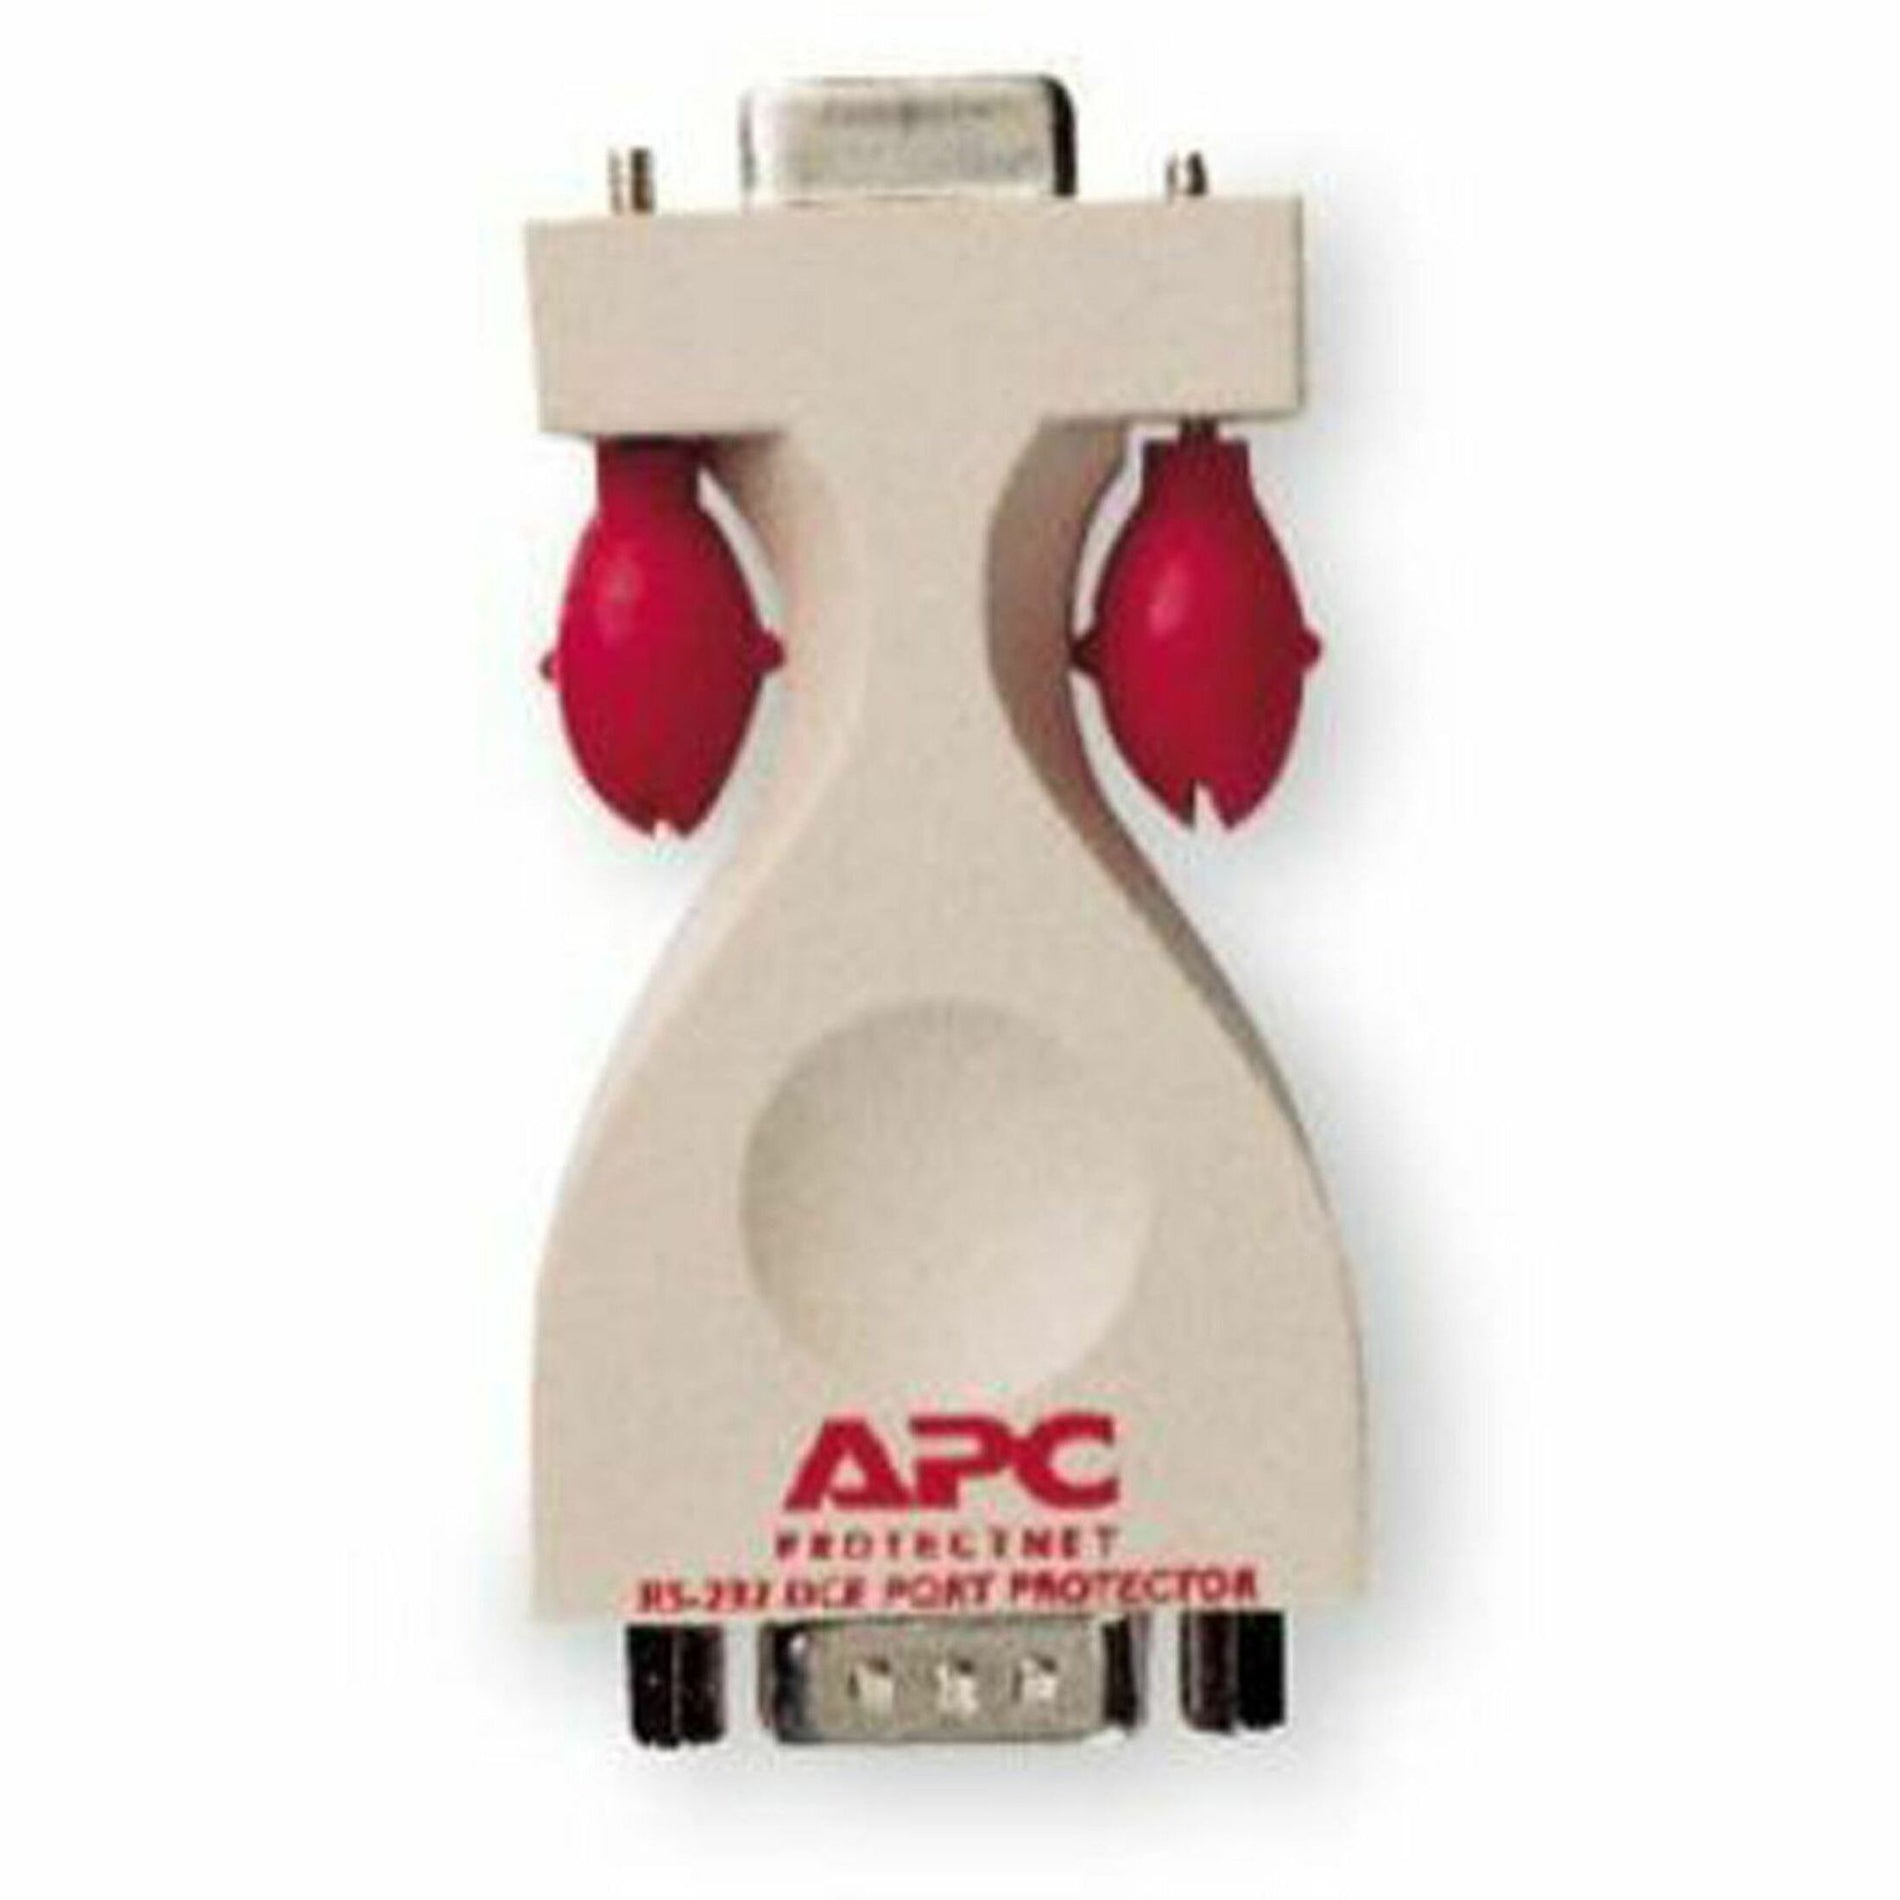 APC PS9-DTE ProtectNet RS232 9 Pin Surge Suppressor, Lifetime Warranty, Catastrophic Event Protection, UL Listed